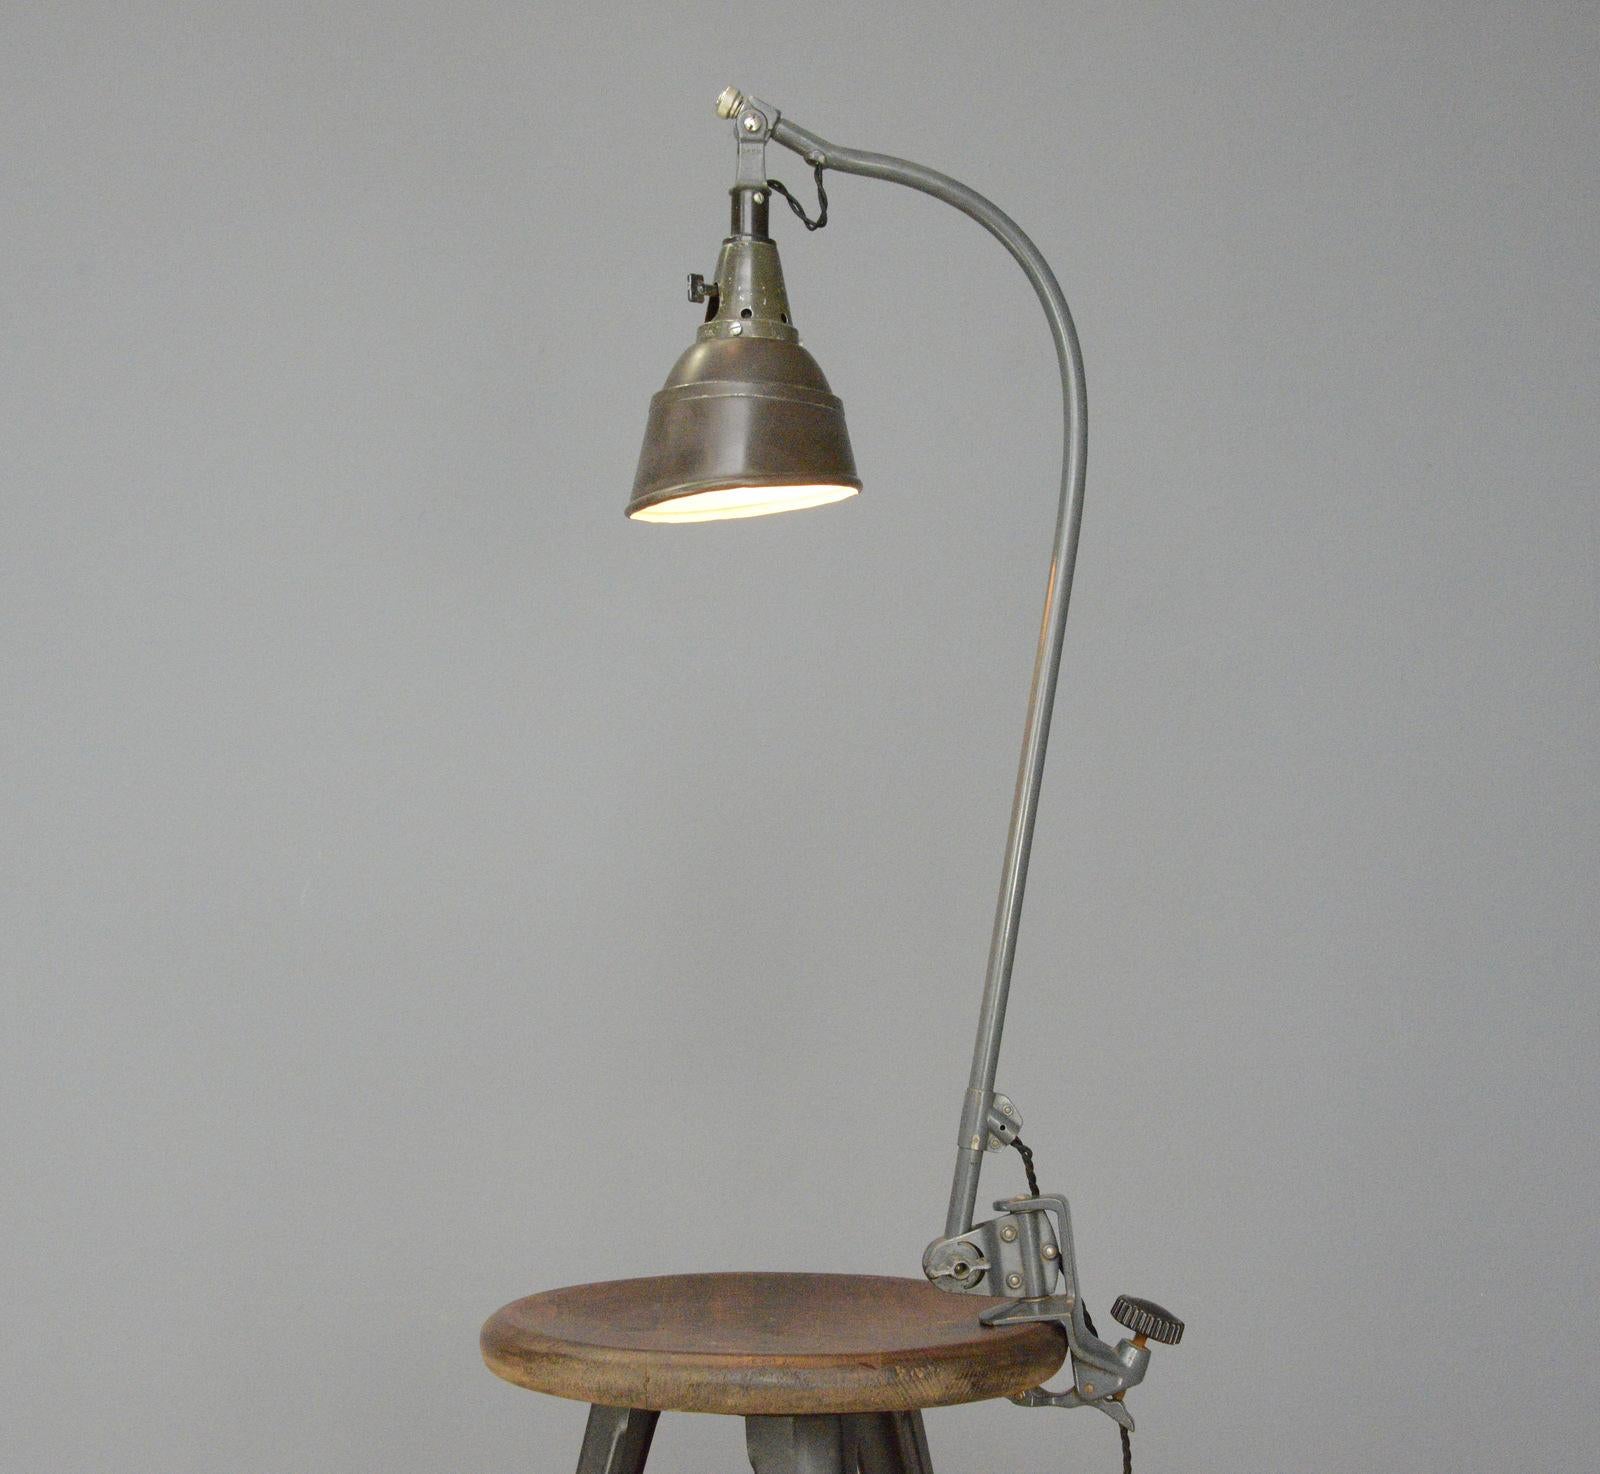 Typ 113 Peitsche Table Lamp by Curt Fischer for Midgard circa 1940s For Sale 3